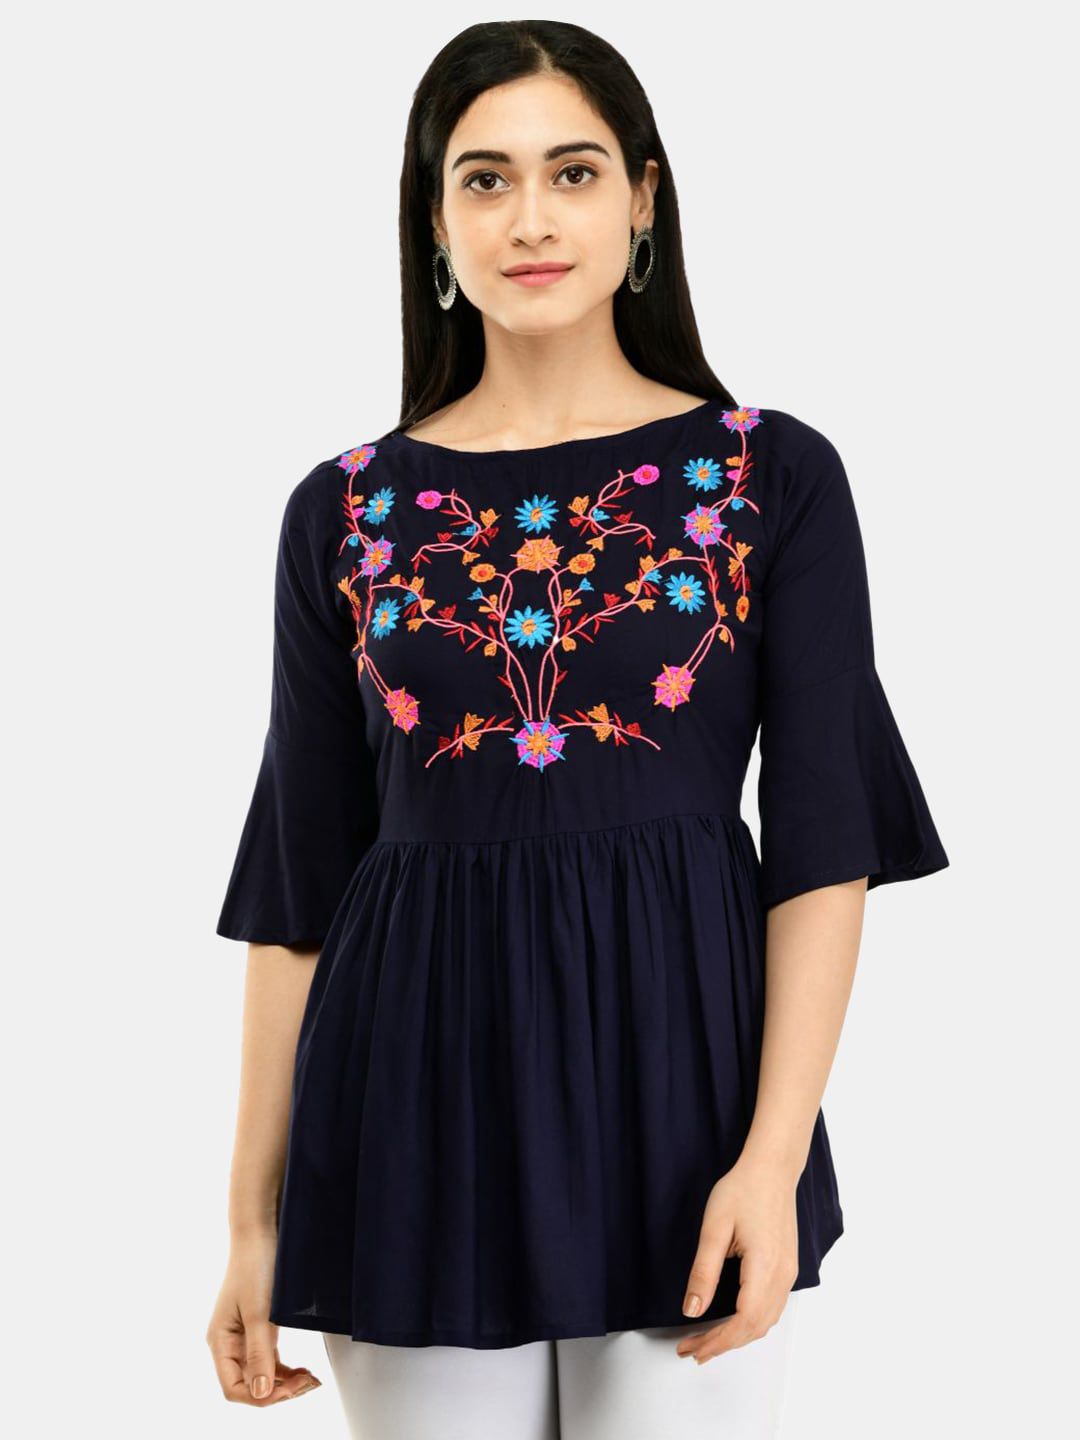 SAAKAA Floral Embroidery Peplum Top Price in India